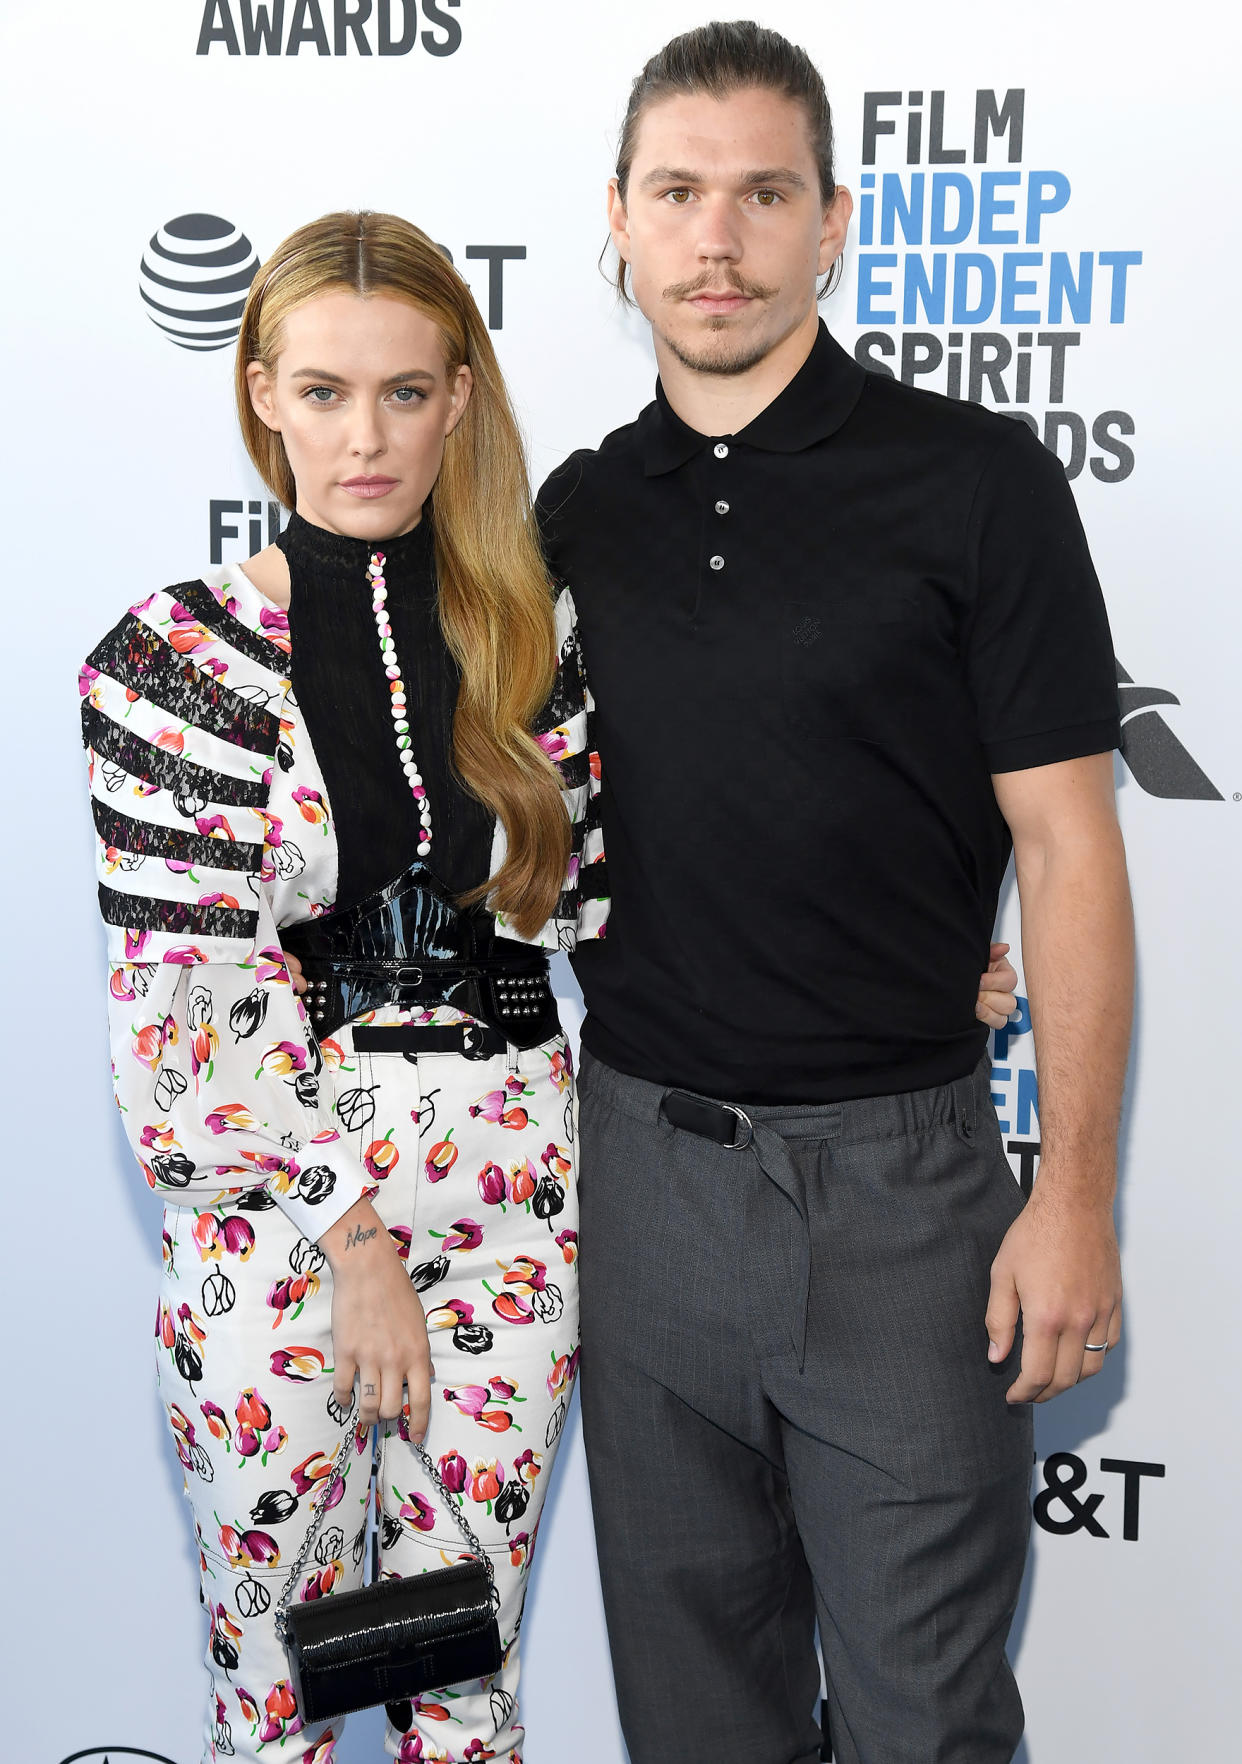 Riley Keough and Ben Smith-Petersen at the 2019 Film Independent Spirit Awards. (Kevin Mazur / Getty Images)